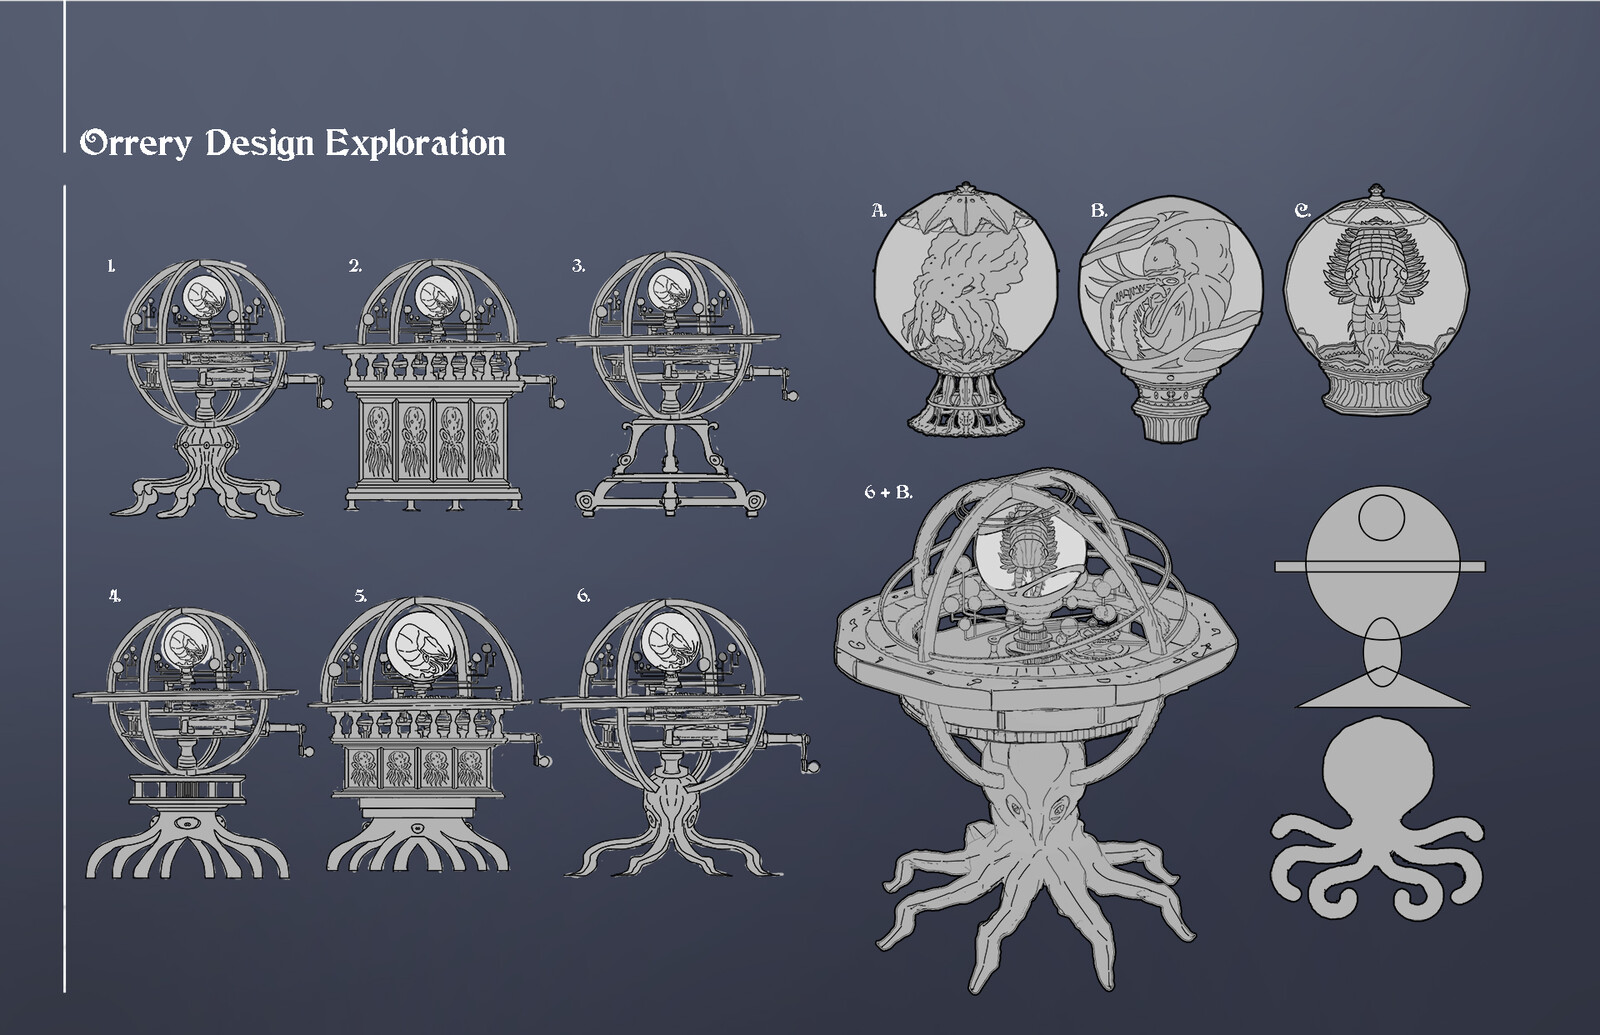 Early ideas and exploration for the Orrery and the creature in the centre of the Orrery. I liked the idea of an octopus shape with the circular top half and the bottom half resembling the legs.   I liked the interlocking rings as a cage motif.